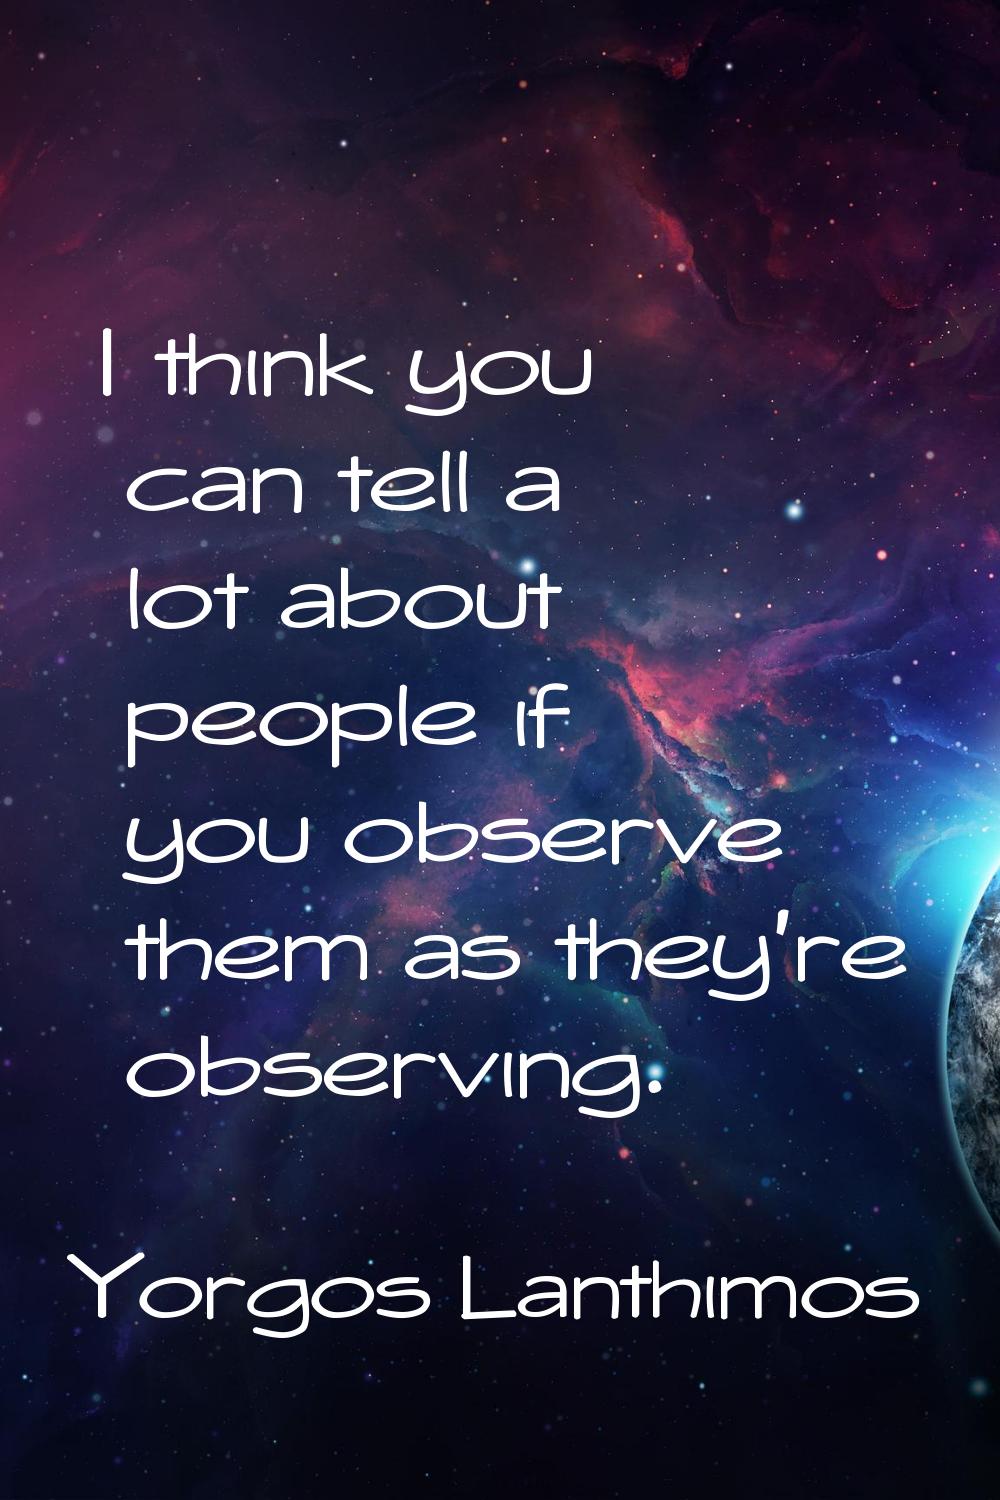 I think you can tell a lot about people if you observe them as they're observing.